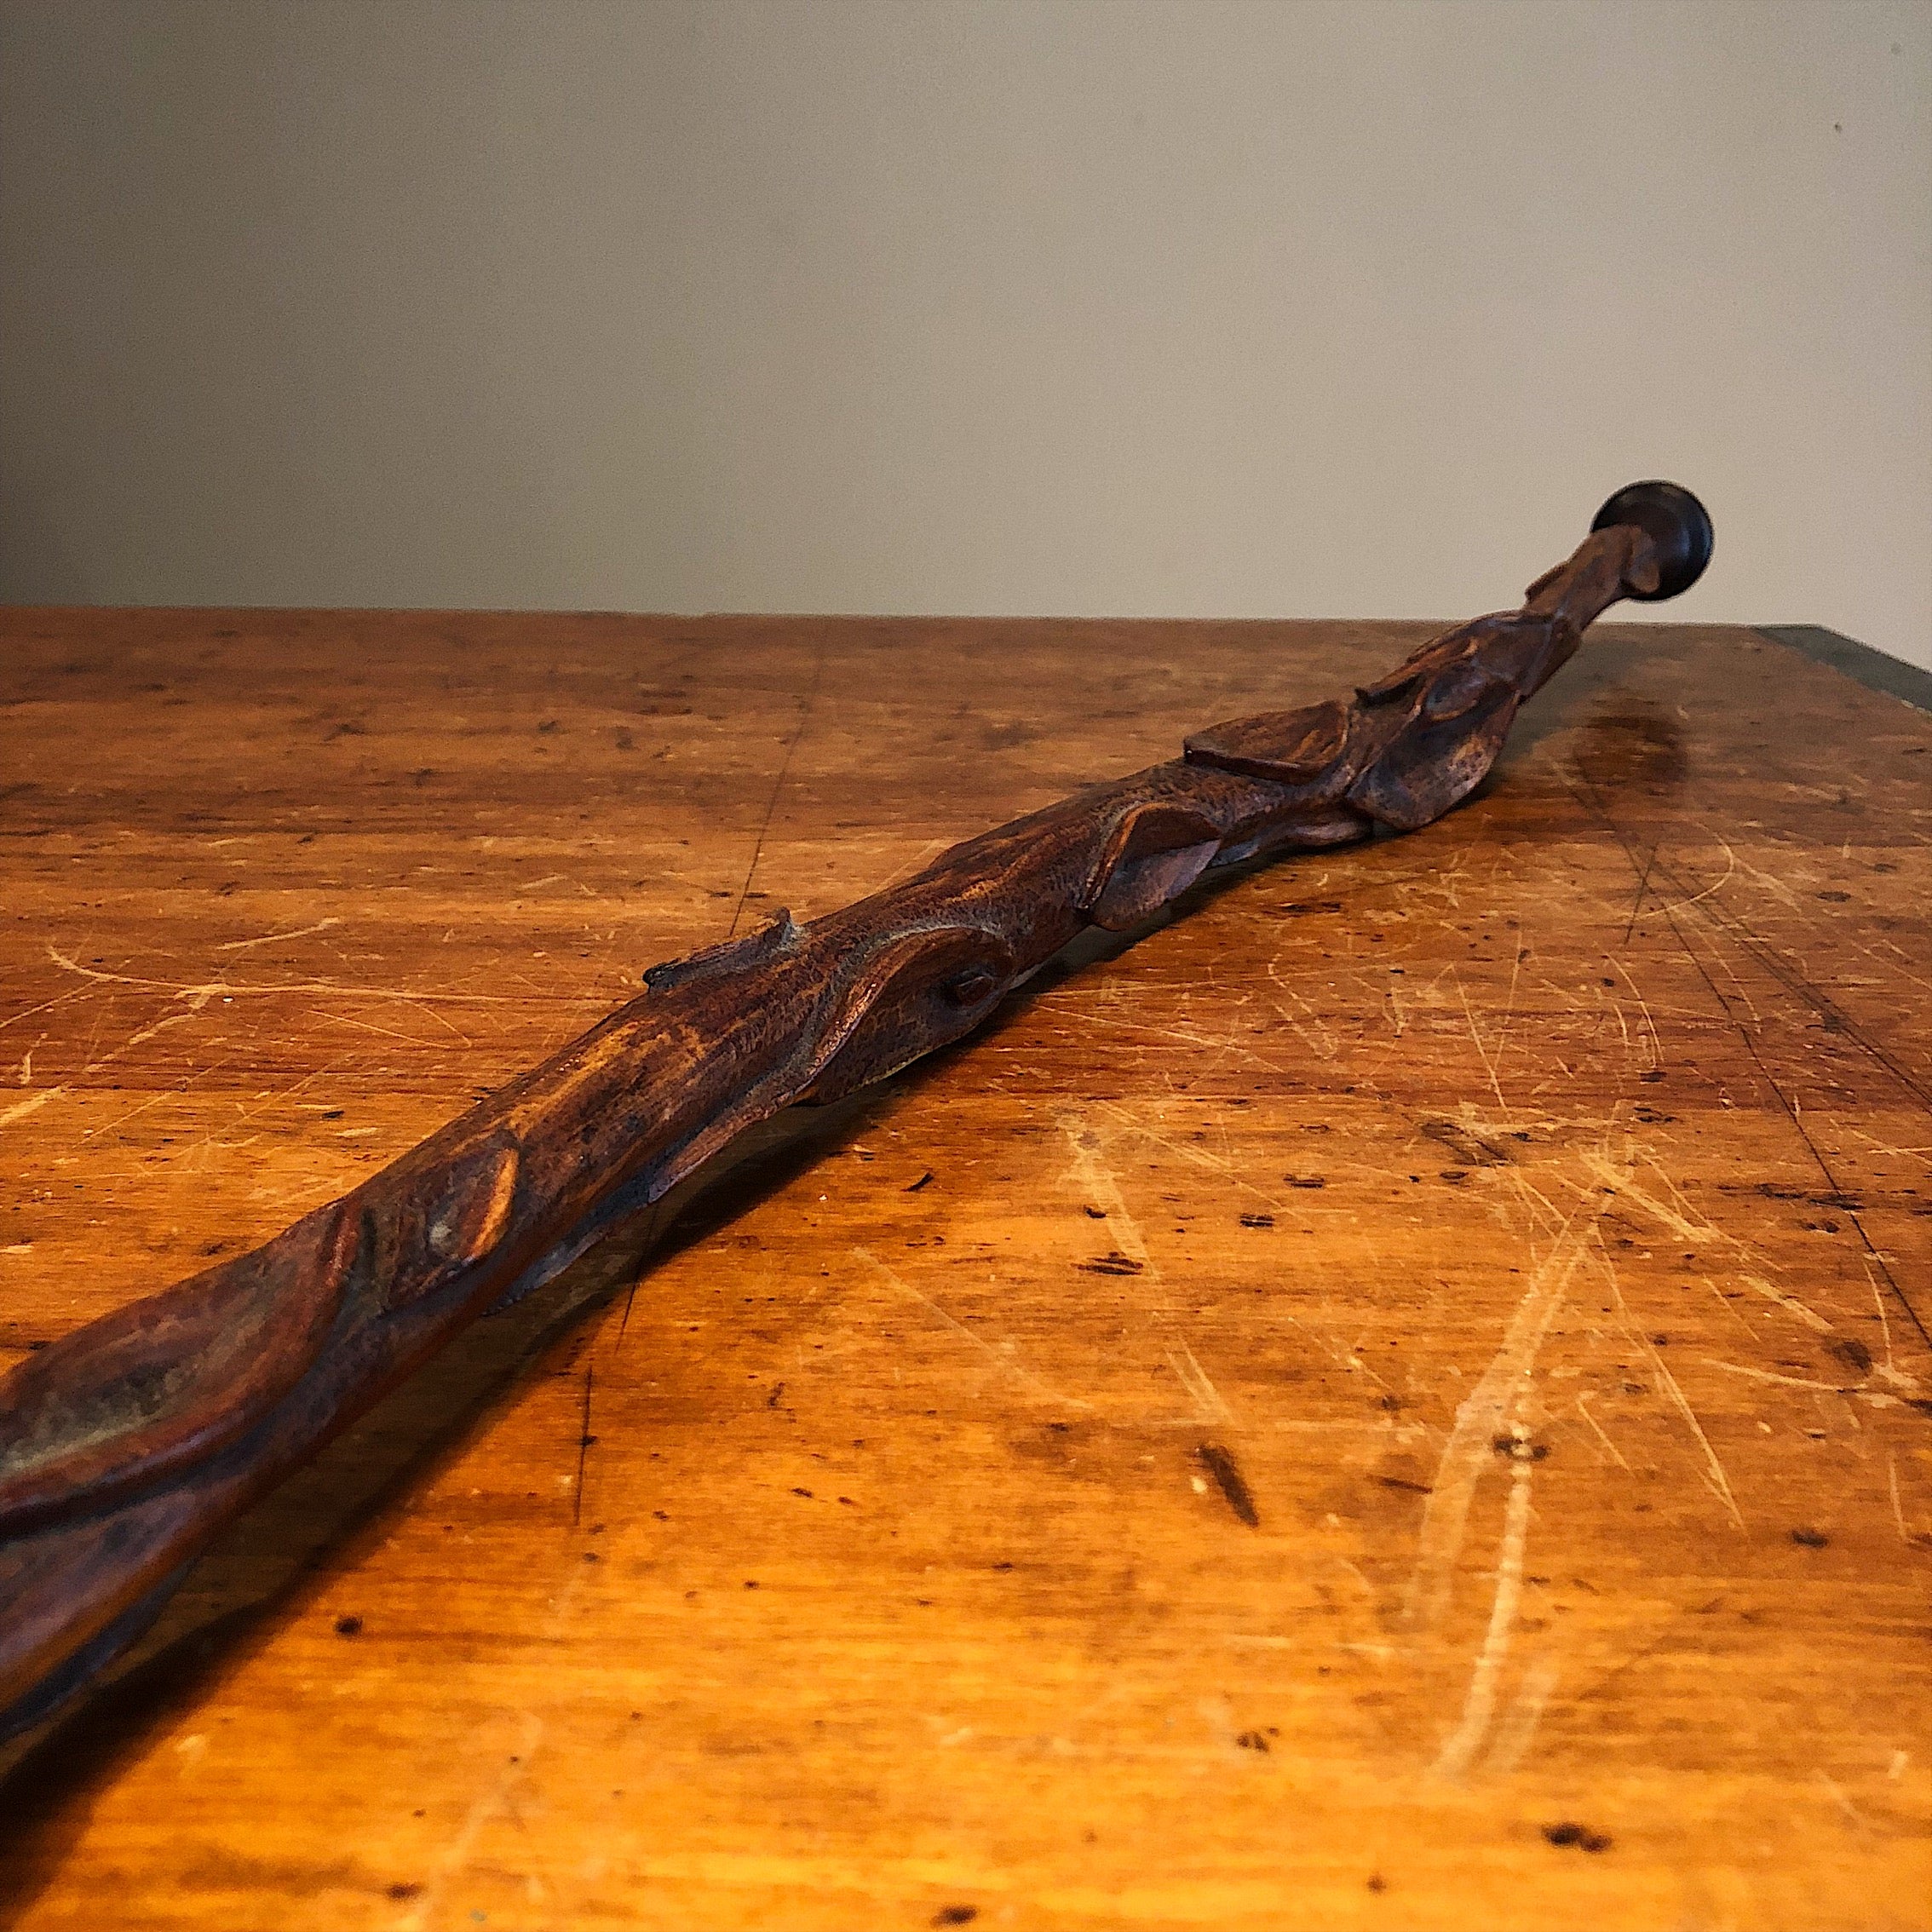 Antique Diamond Willow Walking Stick - Folk Art Cane with Knob Top - Signed C.W.S. - Early 1900s - Bubbled Varnish